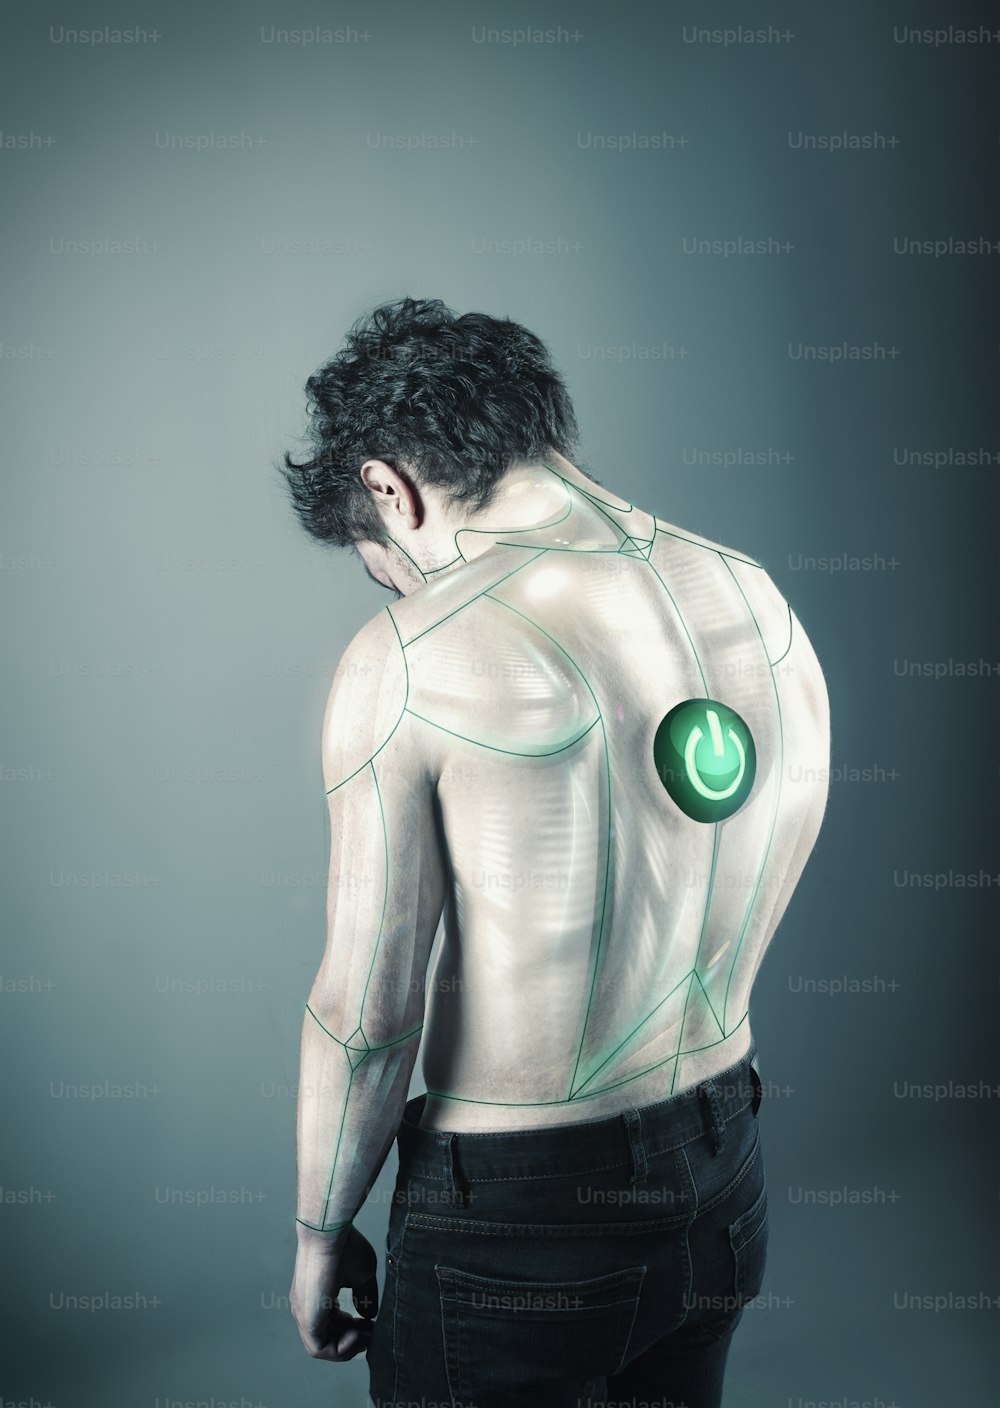 Image of a robot man turned off, with a power button on his back.